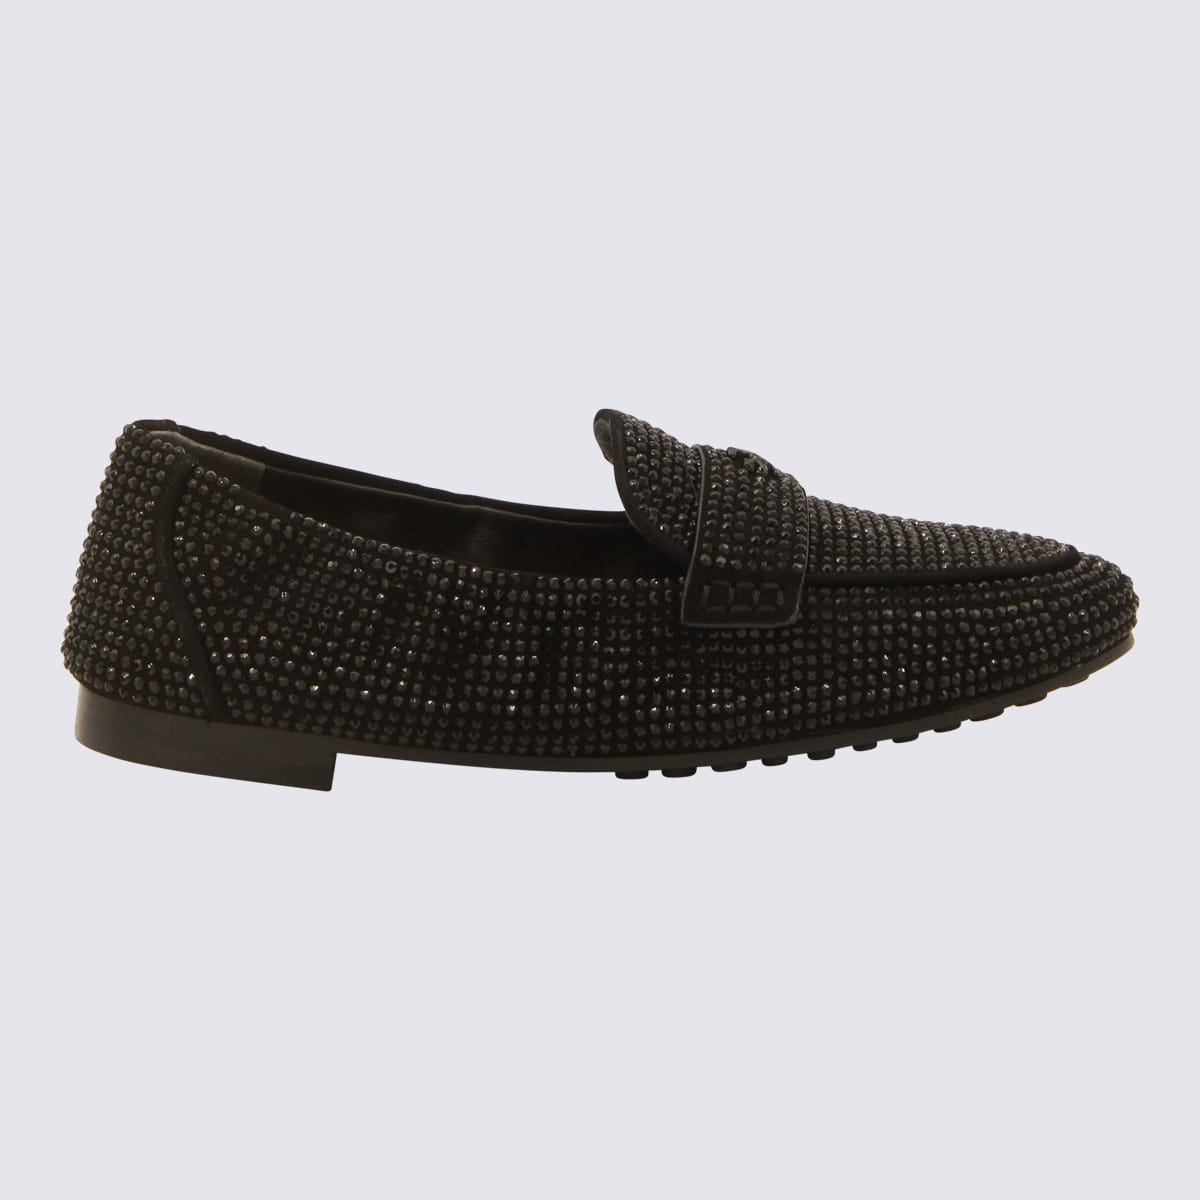 TORY BURCH BLACK LEATHER LOAFERS